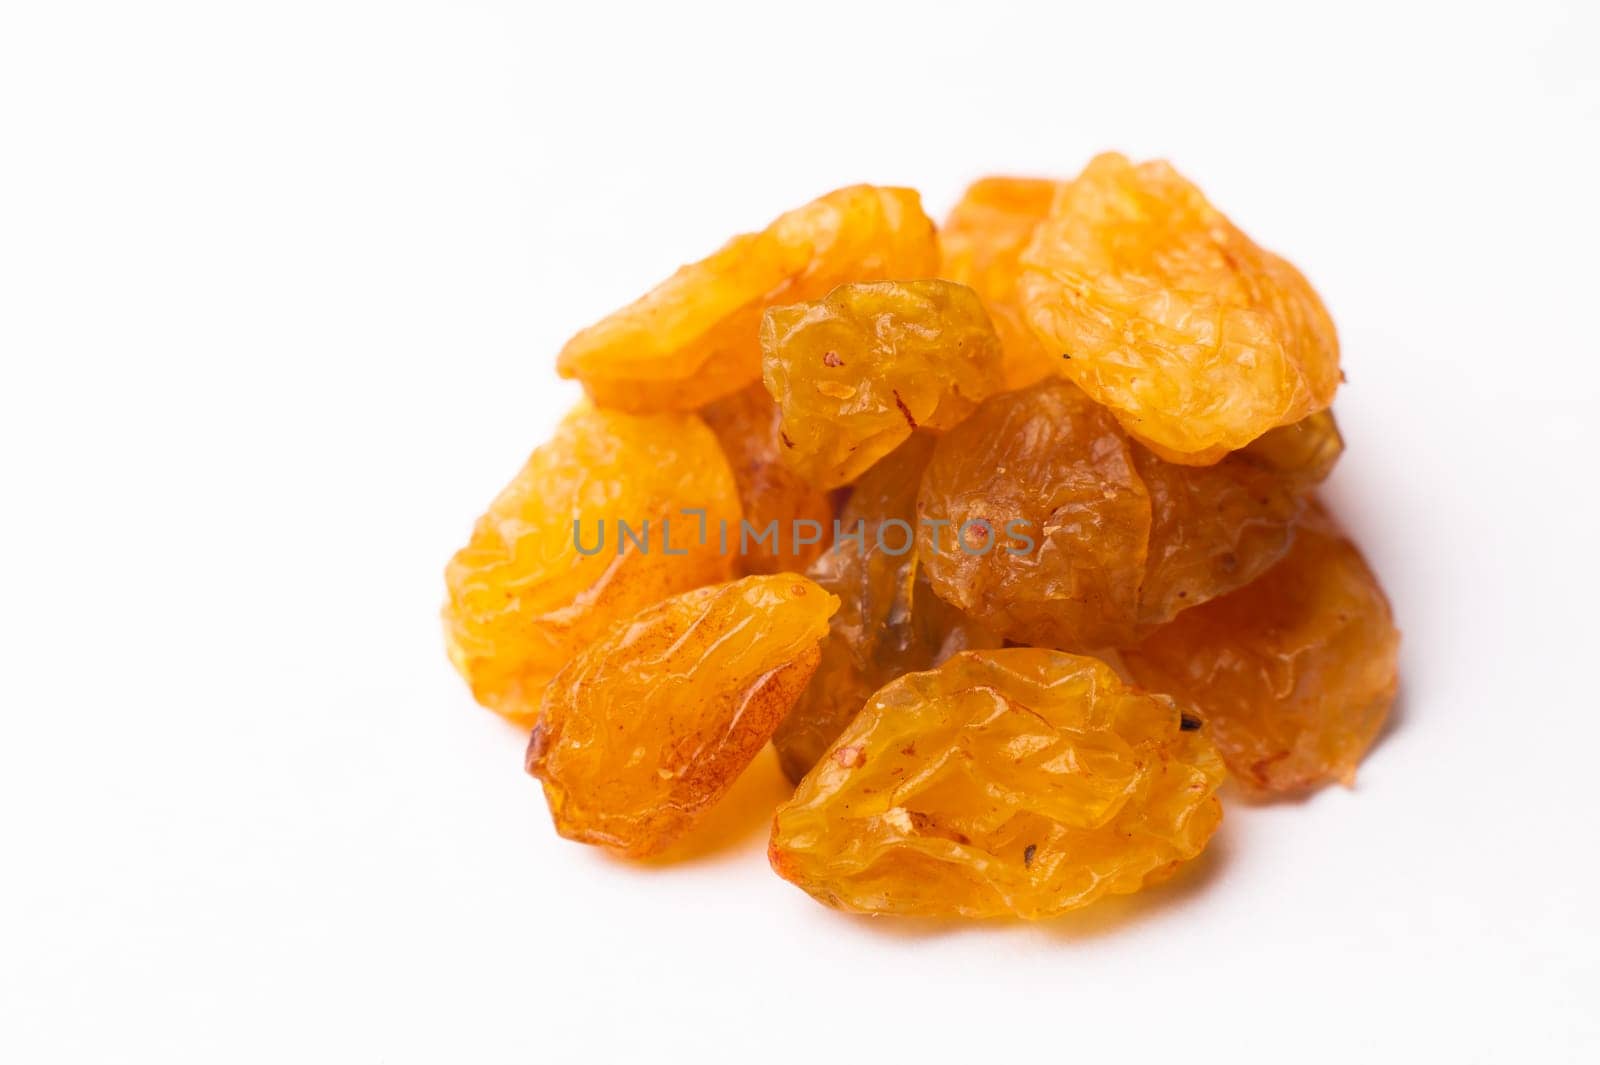 Raisins lie in a pile on a white background, close-up of the texture of the raisins, macro shot.